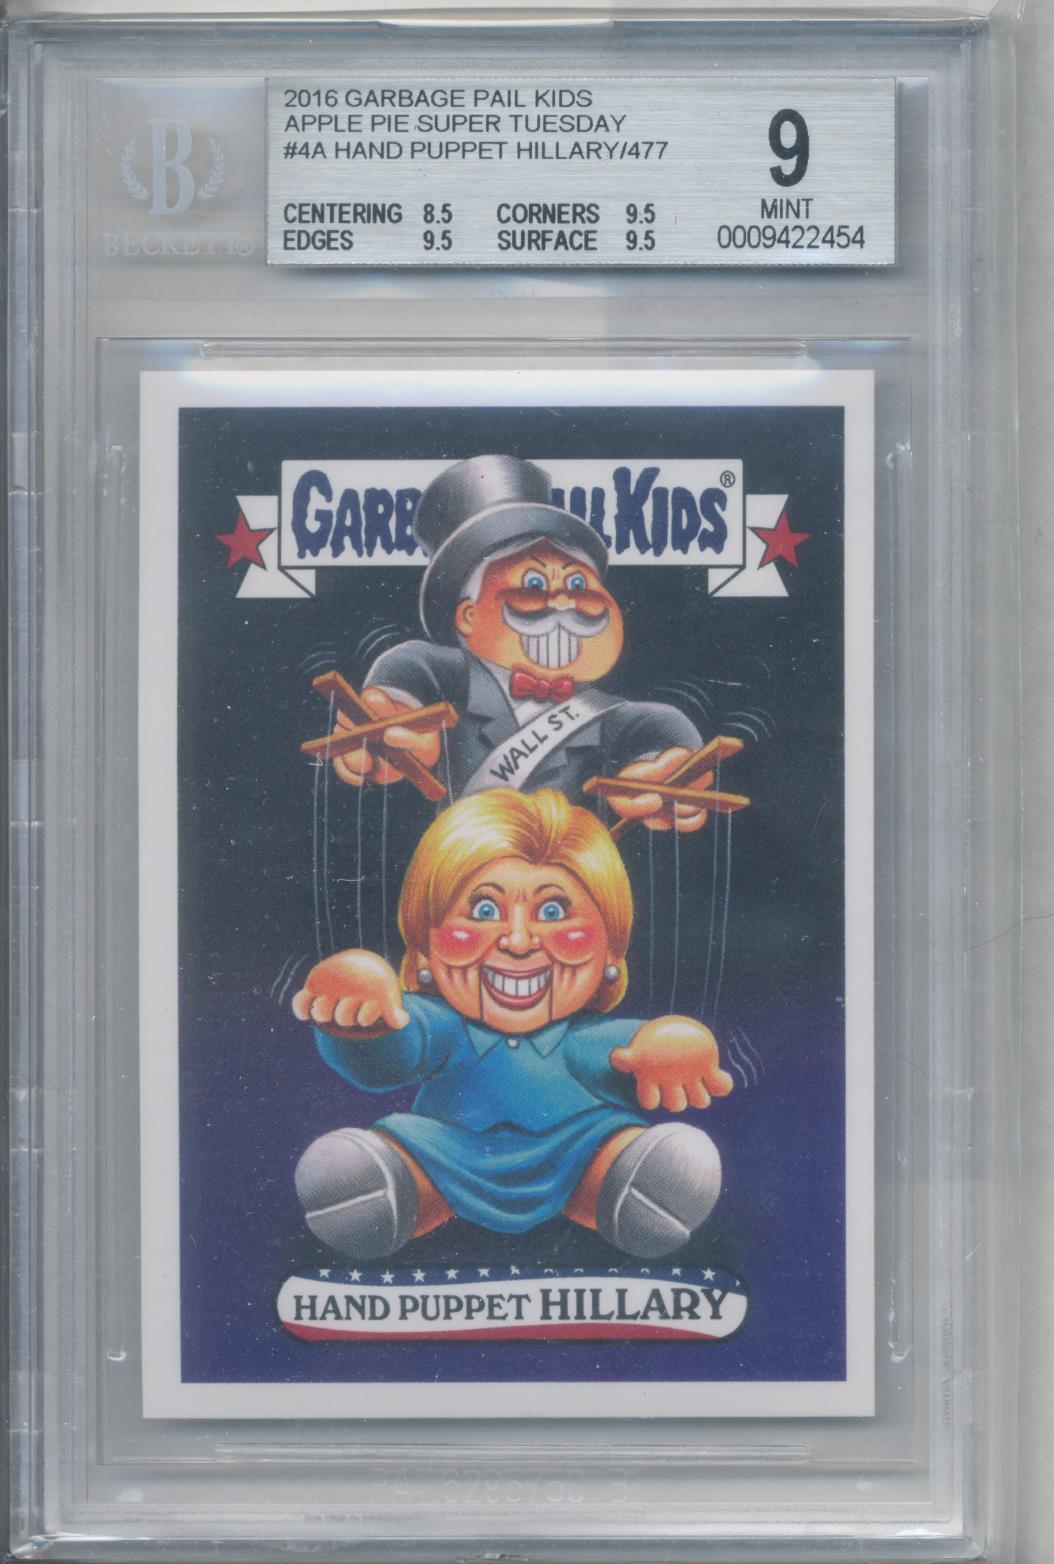 2016 Garbage Pail Kids Super Tuesday BGS 9 MINT Hand Puppet Hillary Clinton /477